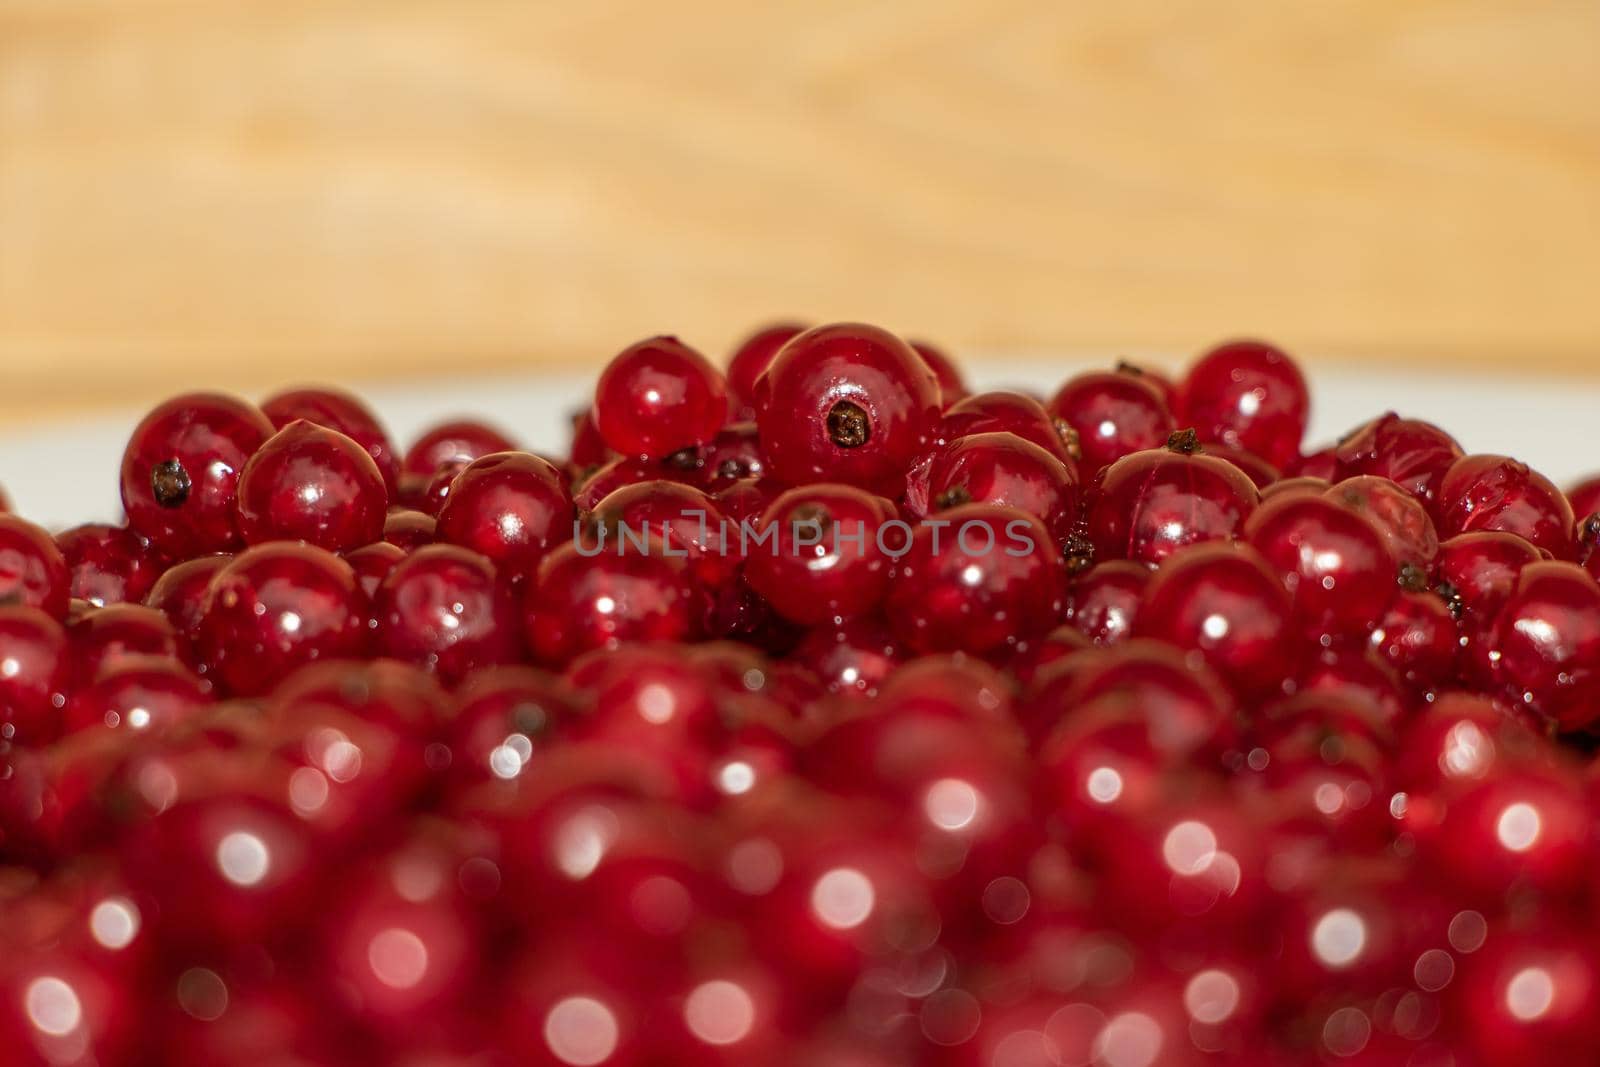 Red currant close up juicy and fresh by Mindru